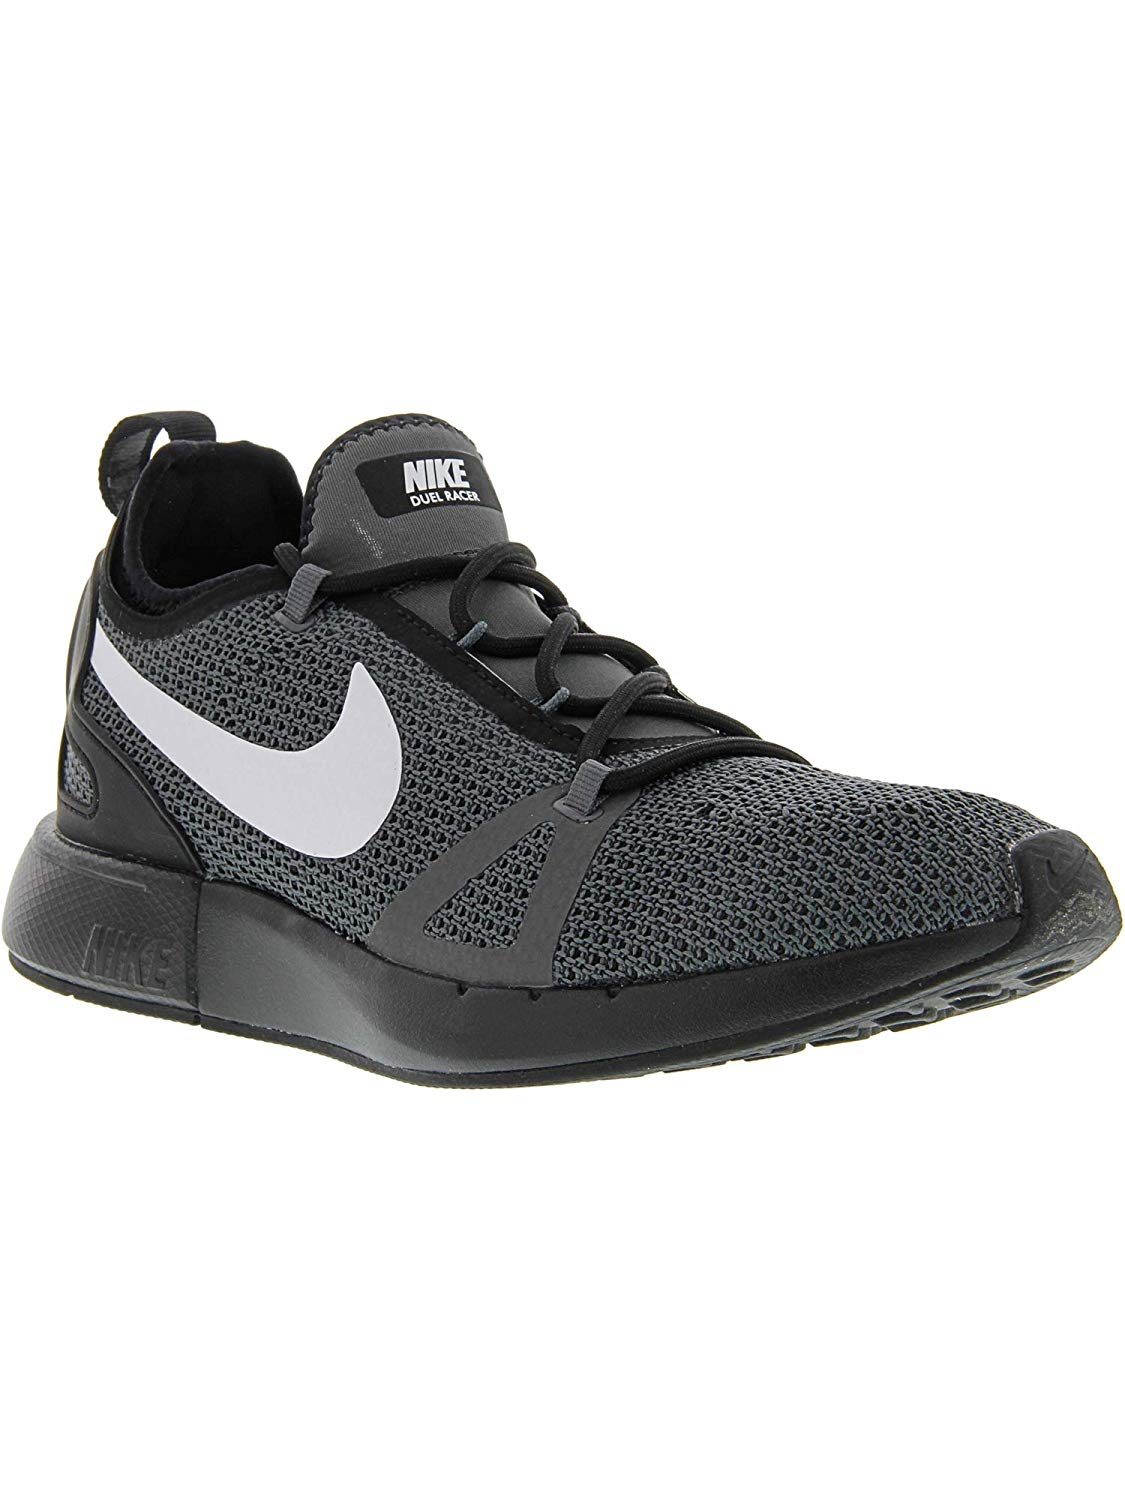 Nike Womens Dual Racer Fabric Low Top Lace Up Running Sneaker, Black ...